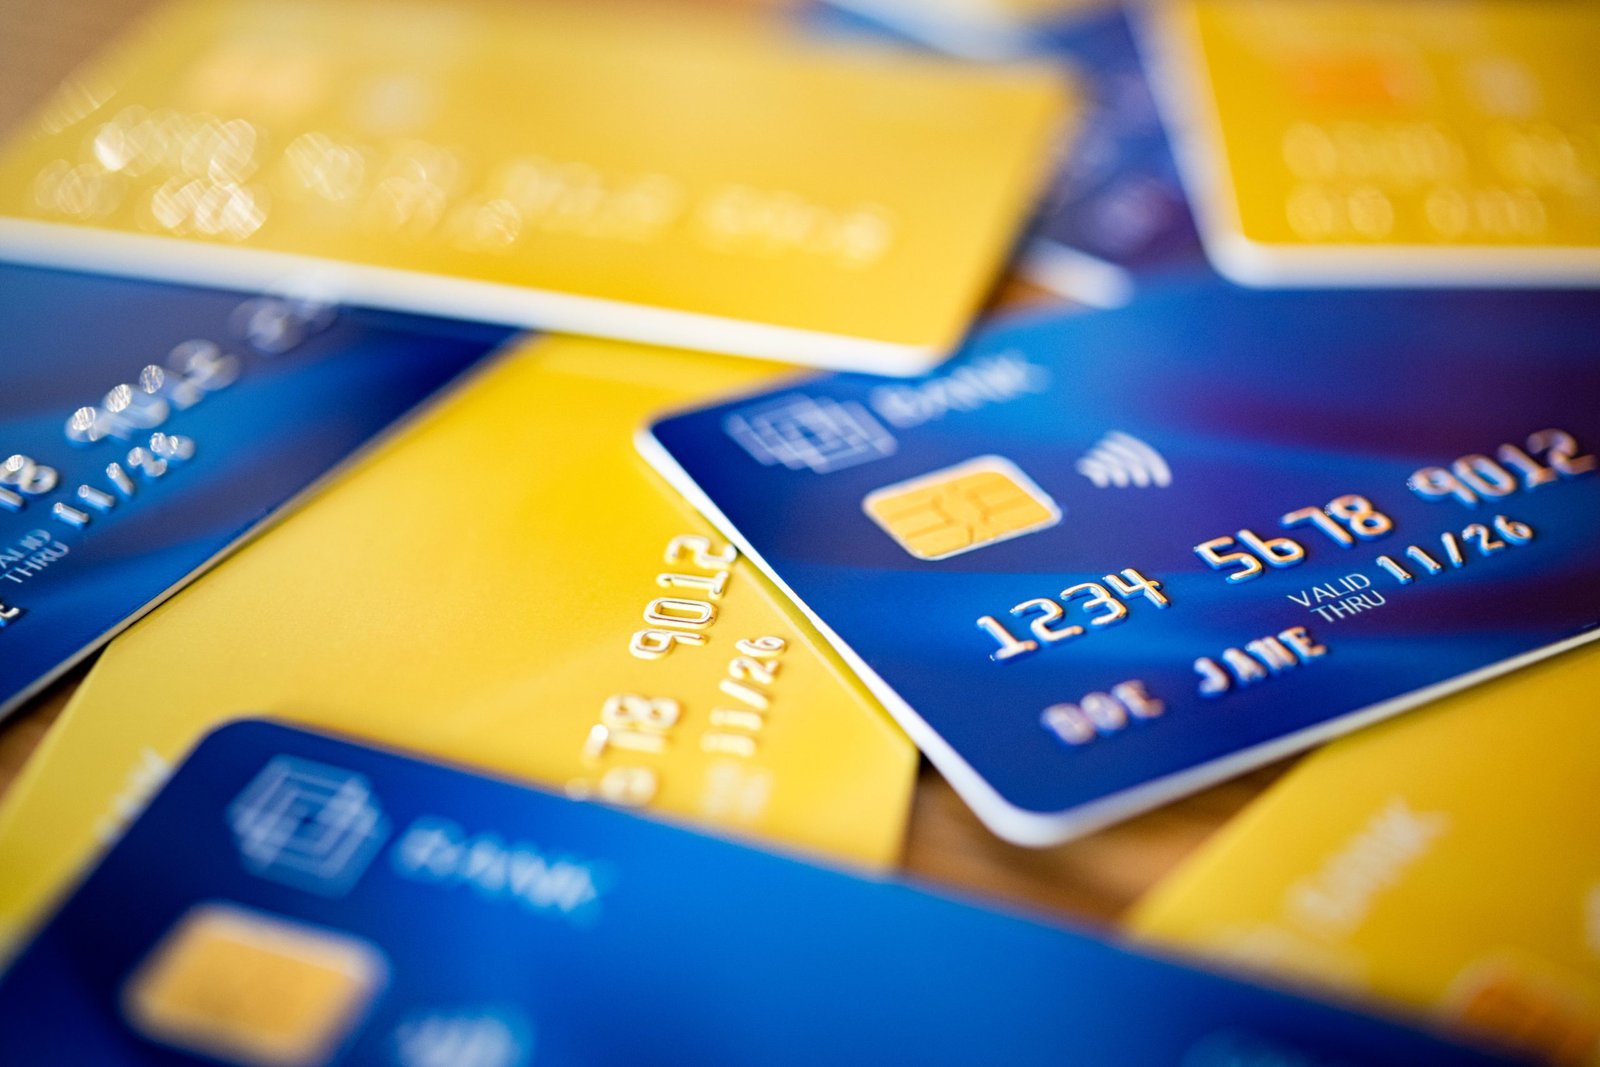 Credit Card Stacking: An Unsecured Business Line of Credit